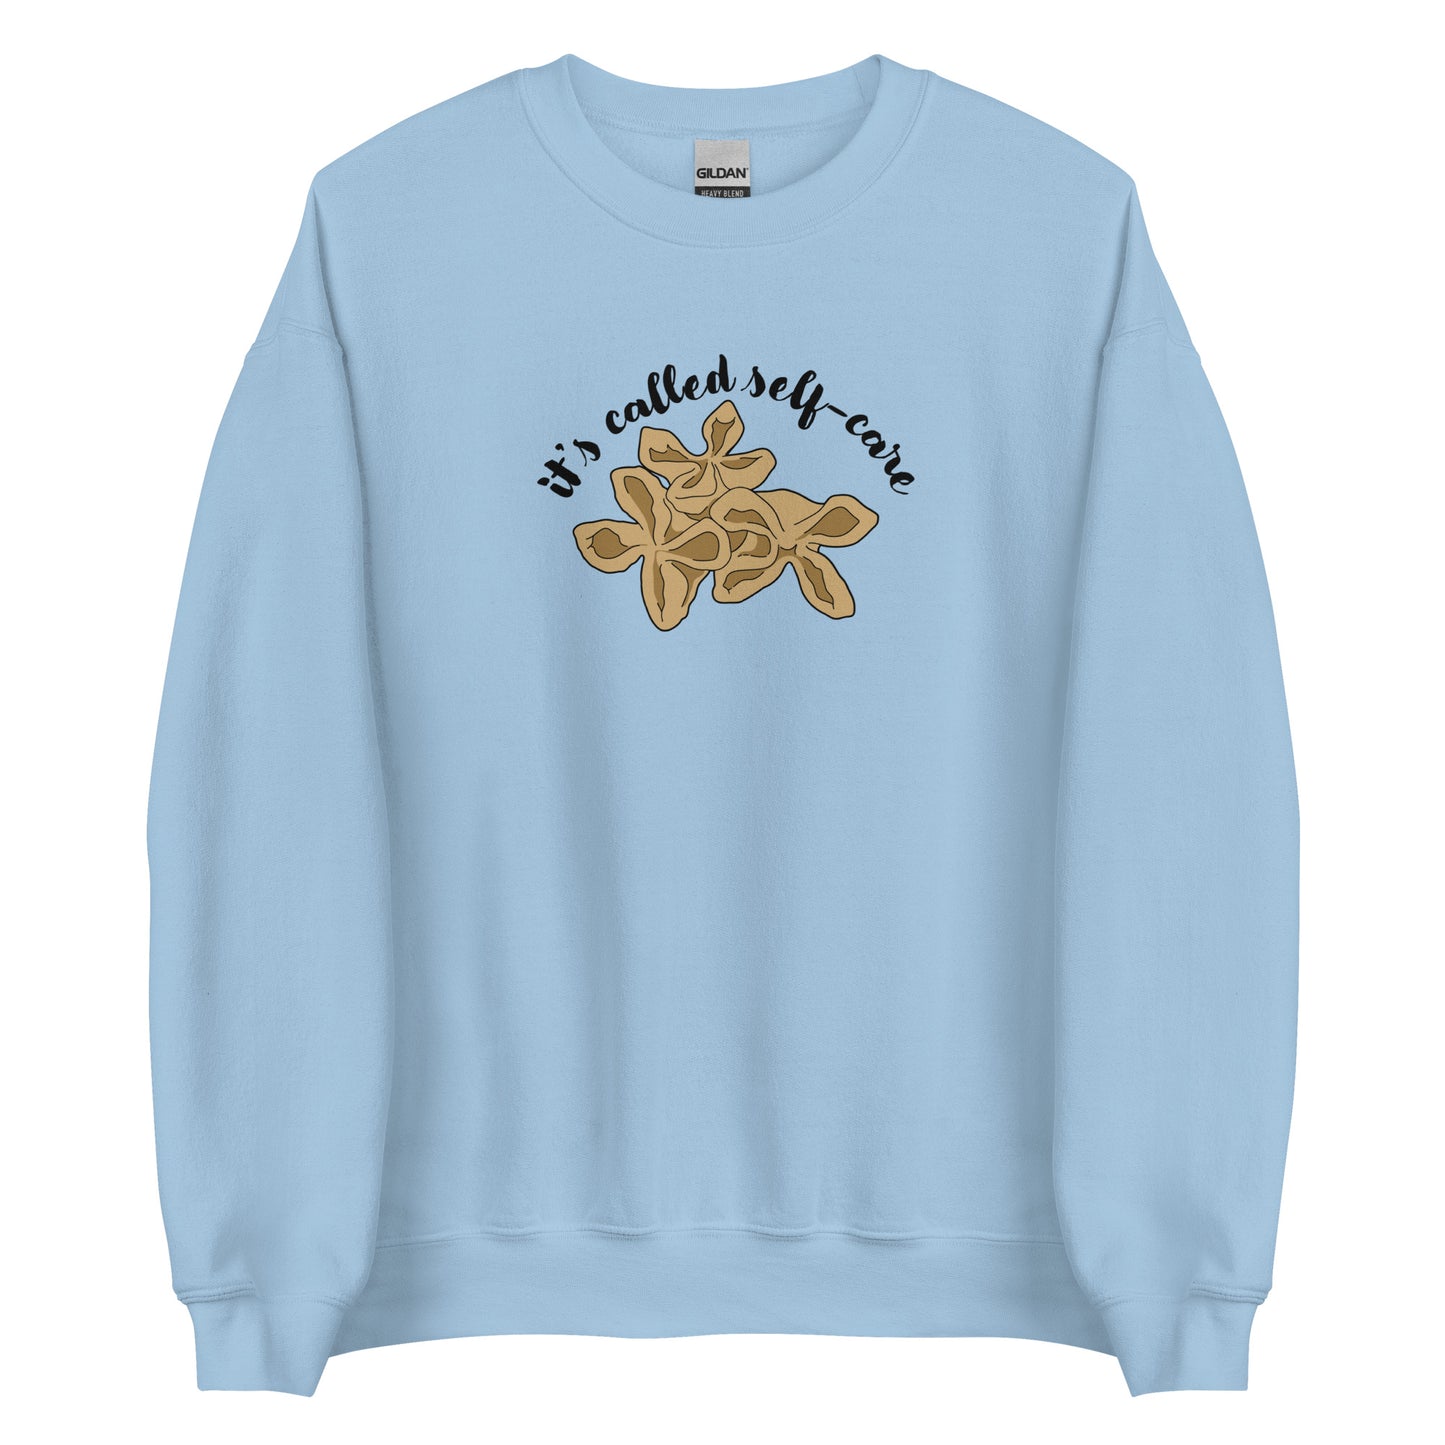 A light blue crewneck sweatshirt featuring an illustration of three pieces of crab rangoon. Text in an arc above the crab rangoon reads "it's called self-care" in a cursive script.